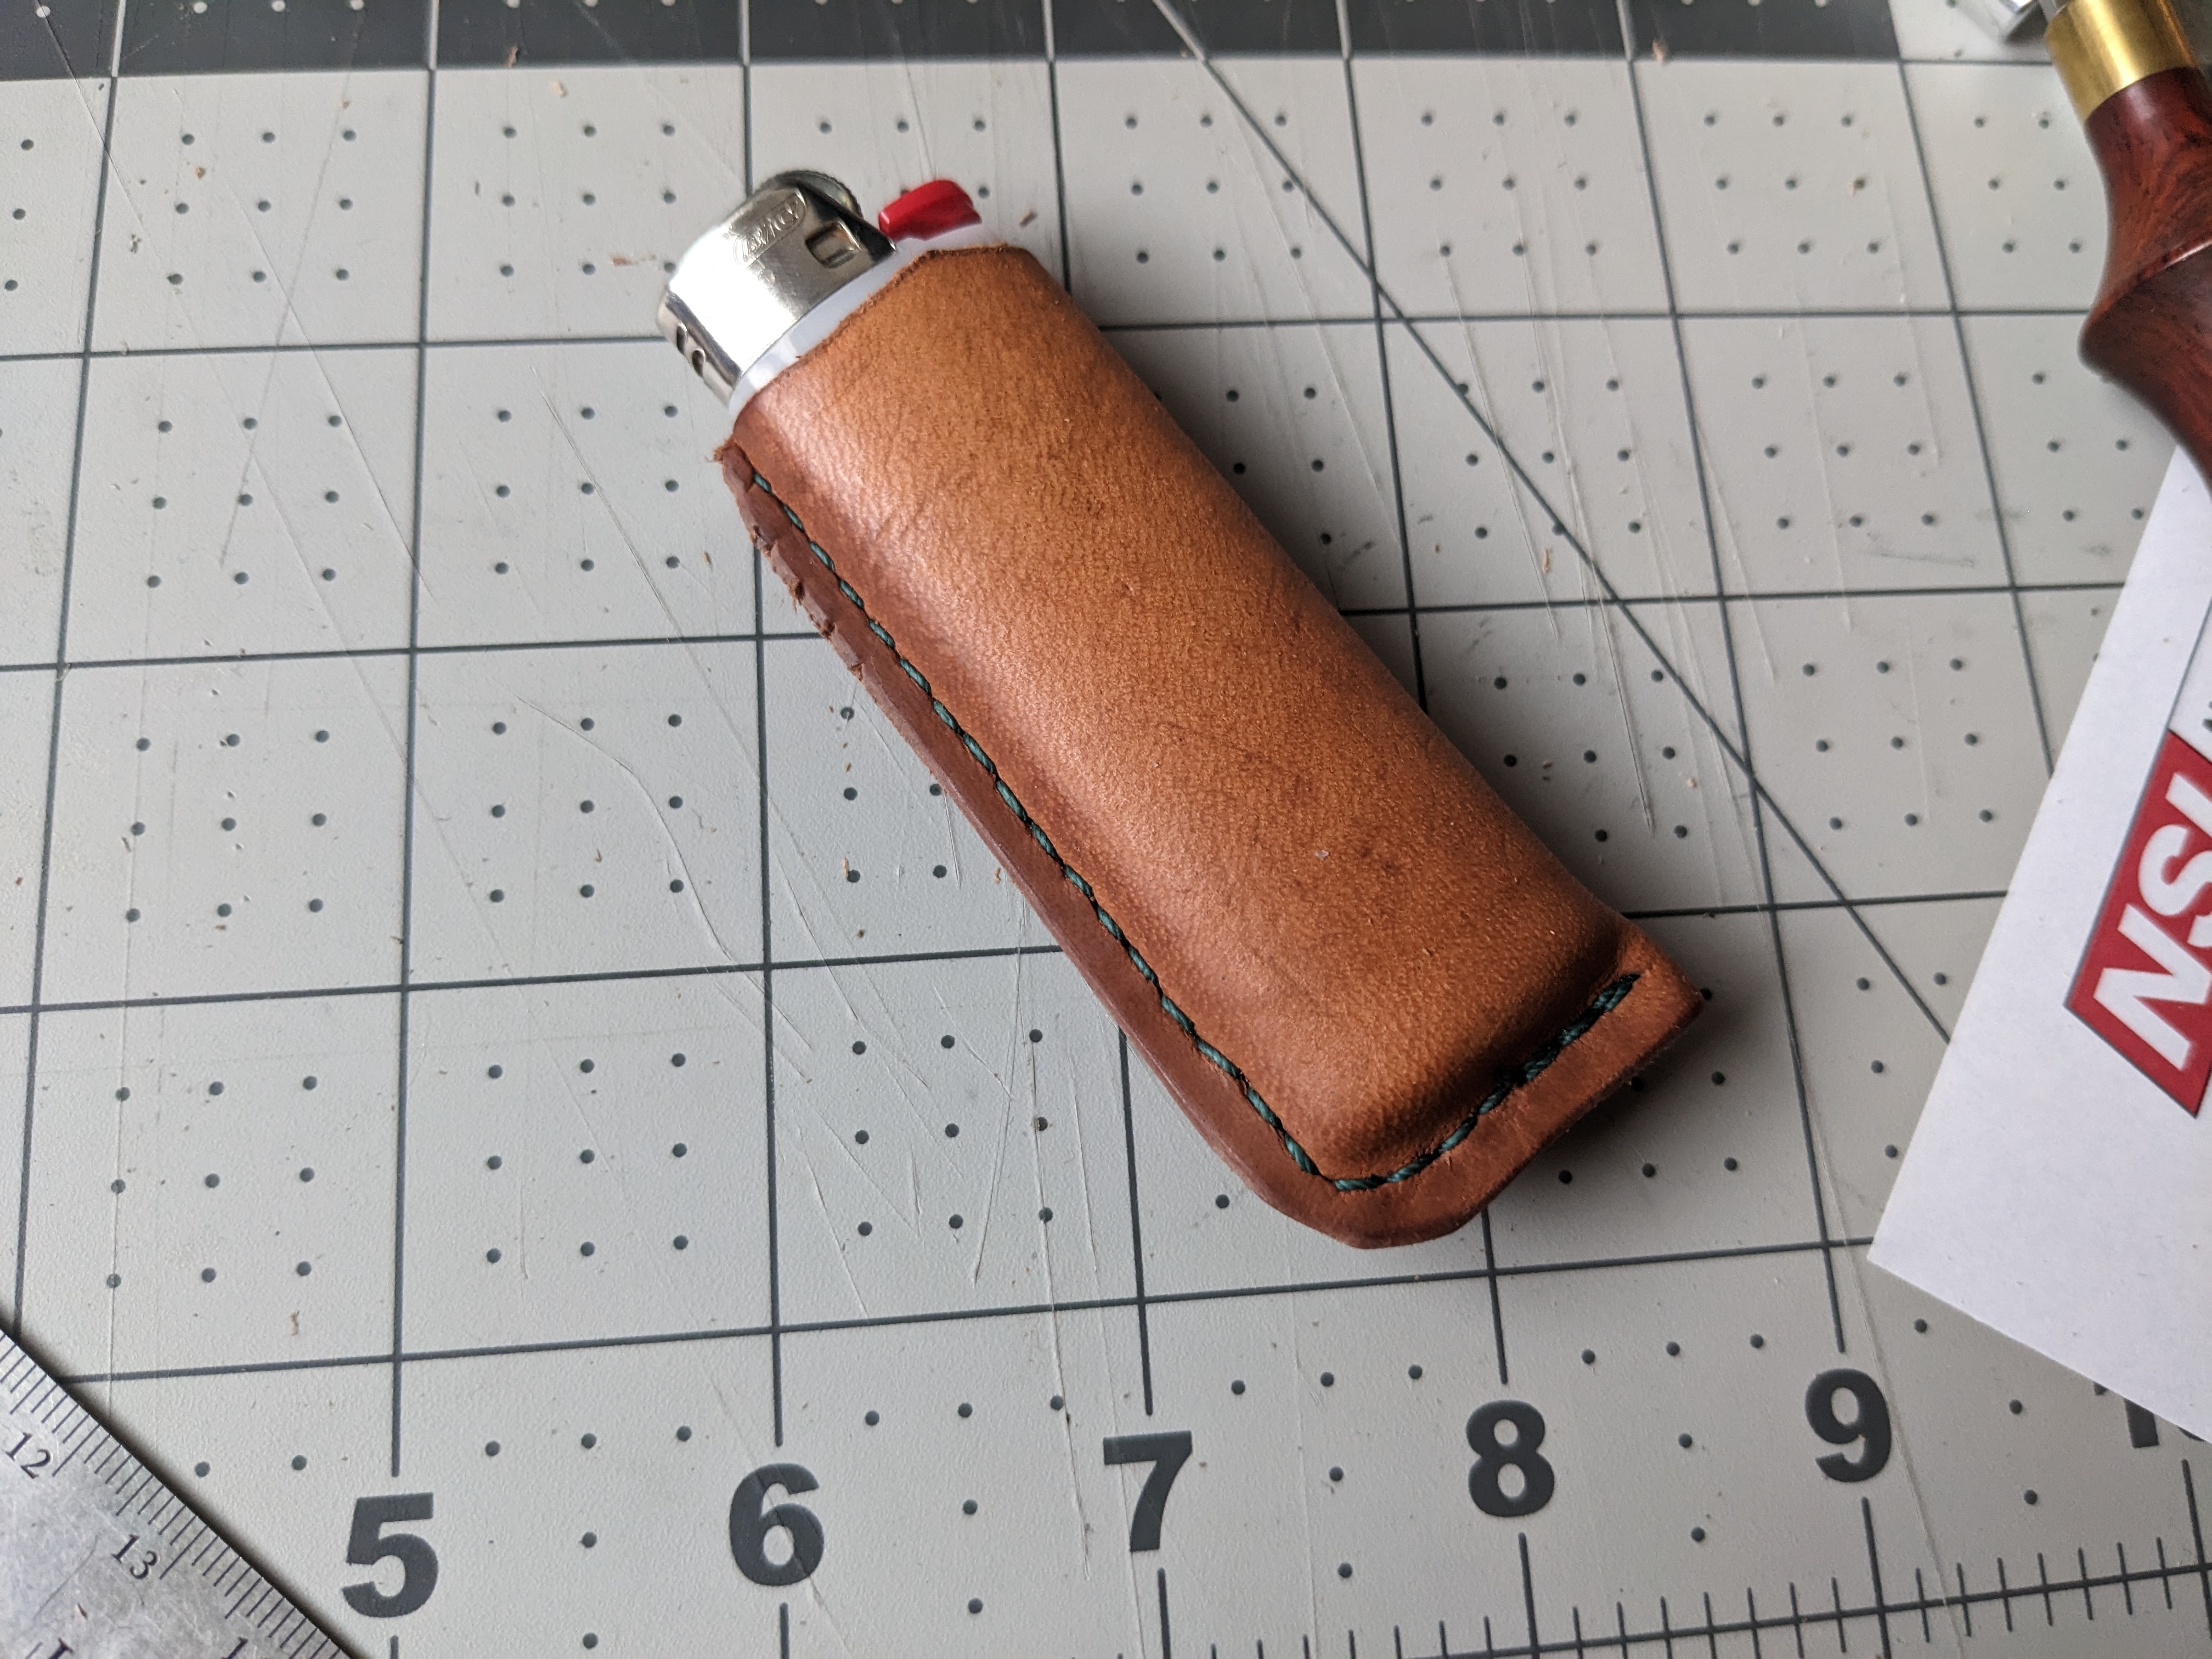 A bic lighter wrapped in leather and hand-stitched up one side.